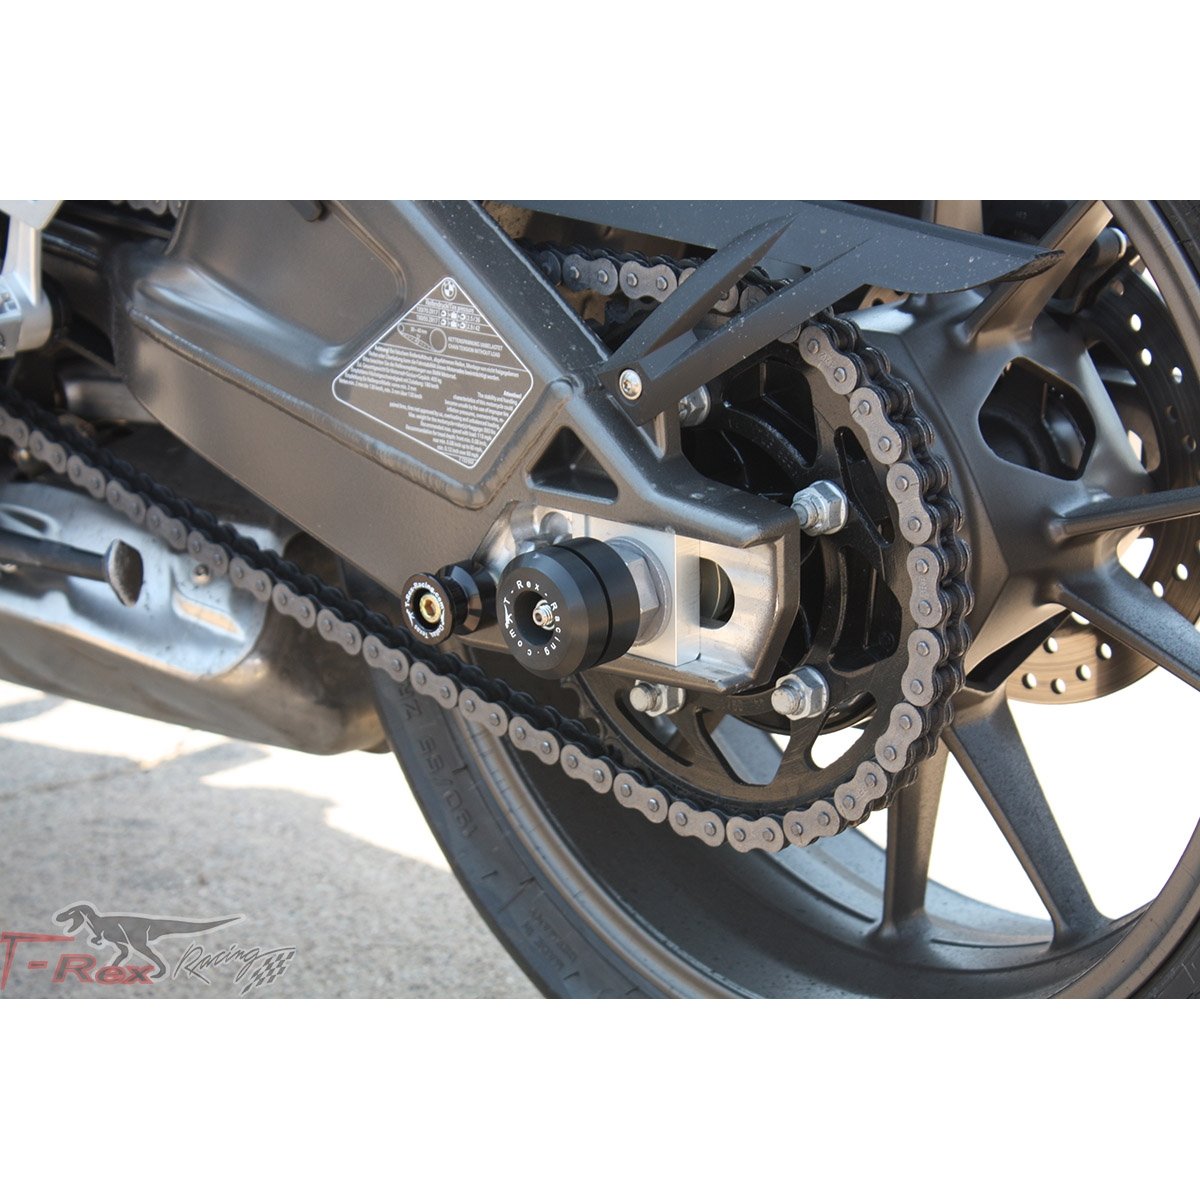 T-rex 2013 - 2014 BMW S1000RR HP4 No Cut Frame Front & Rear Axle Sliders Case Covers Spools